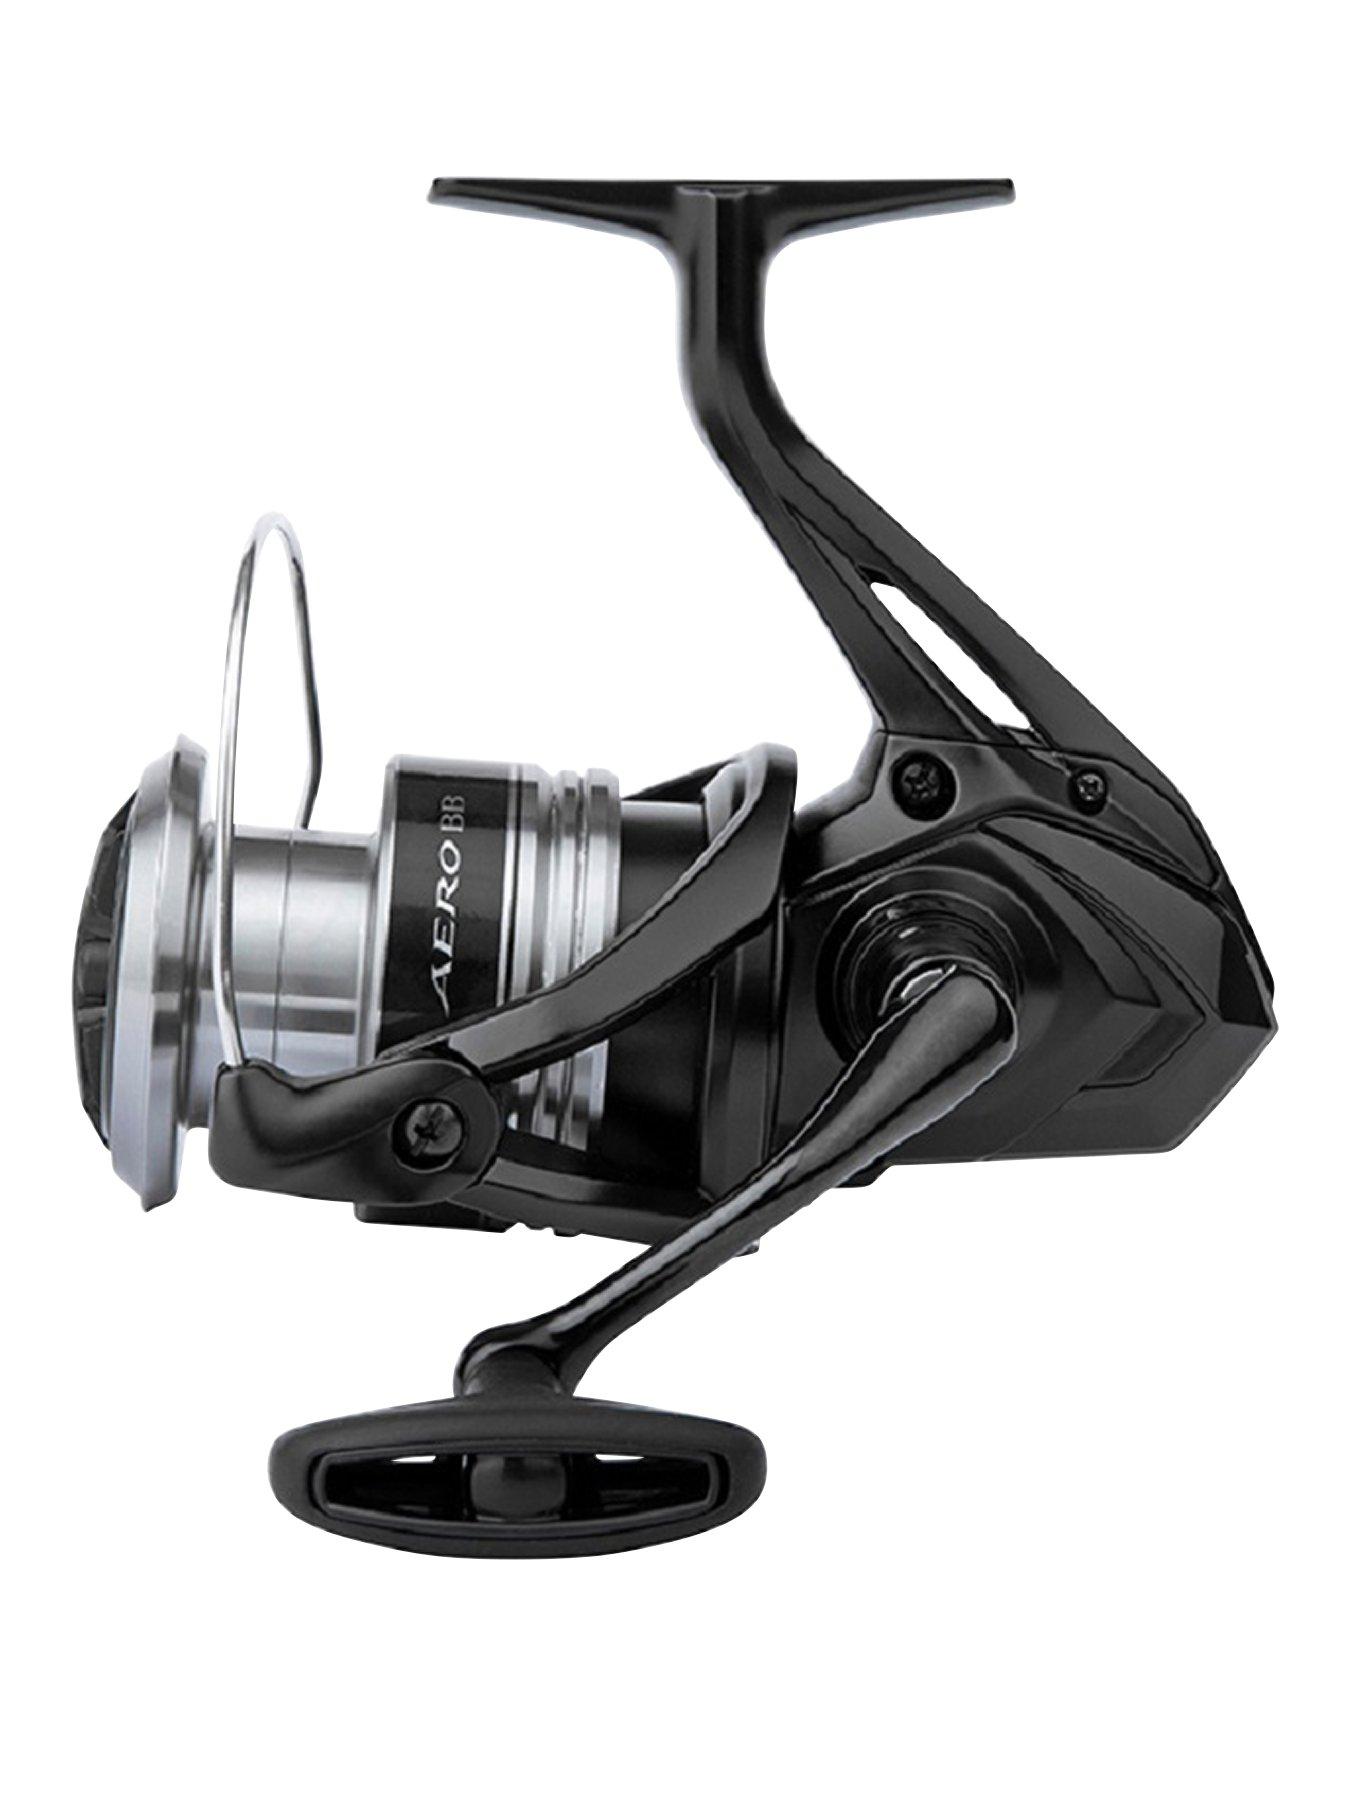 How to Service Shimano Fishing Reel • Complete 5 min 